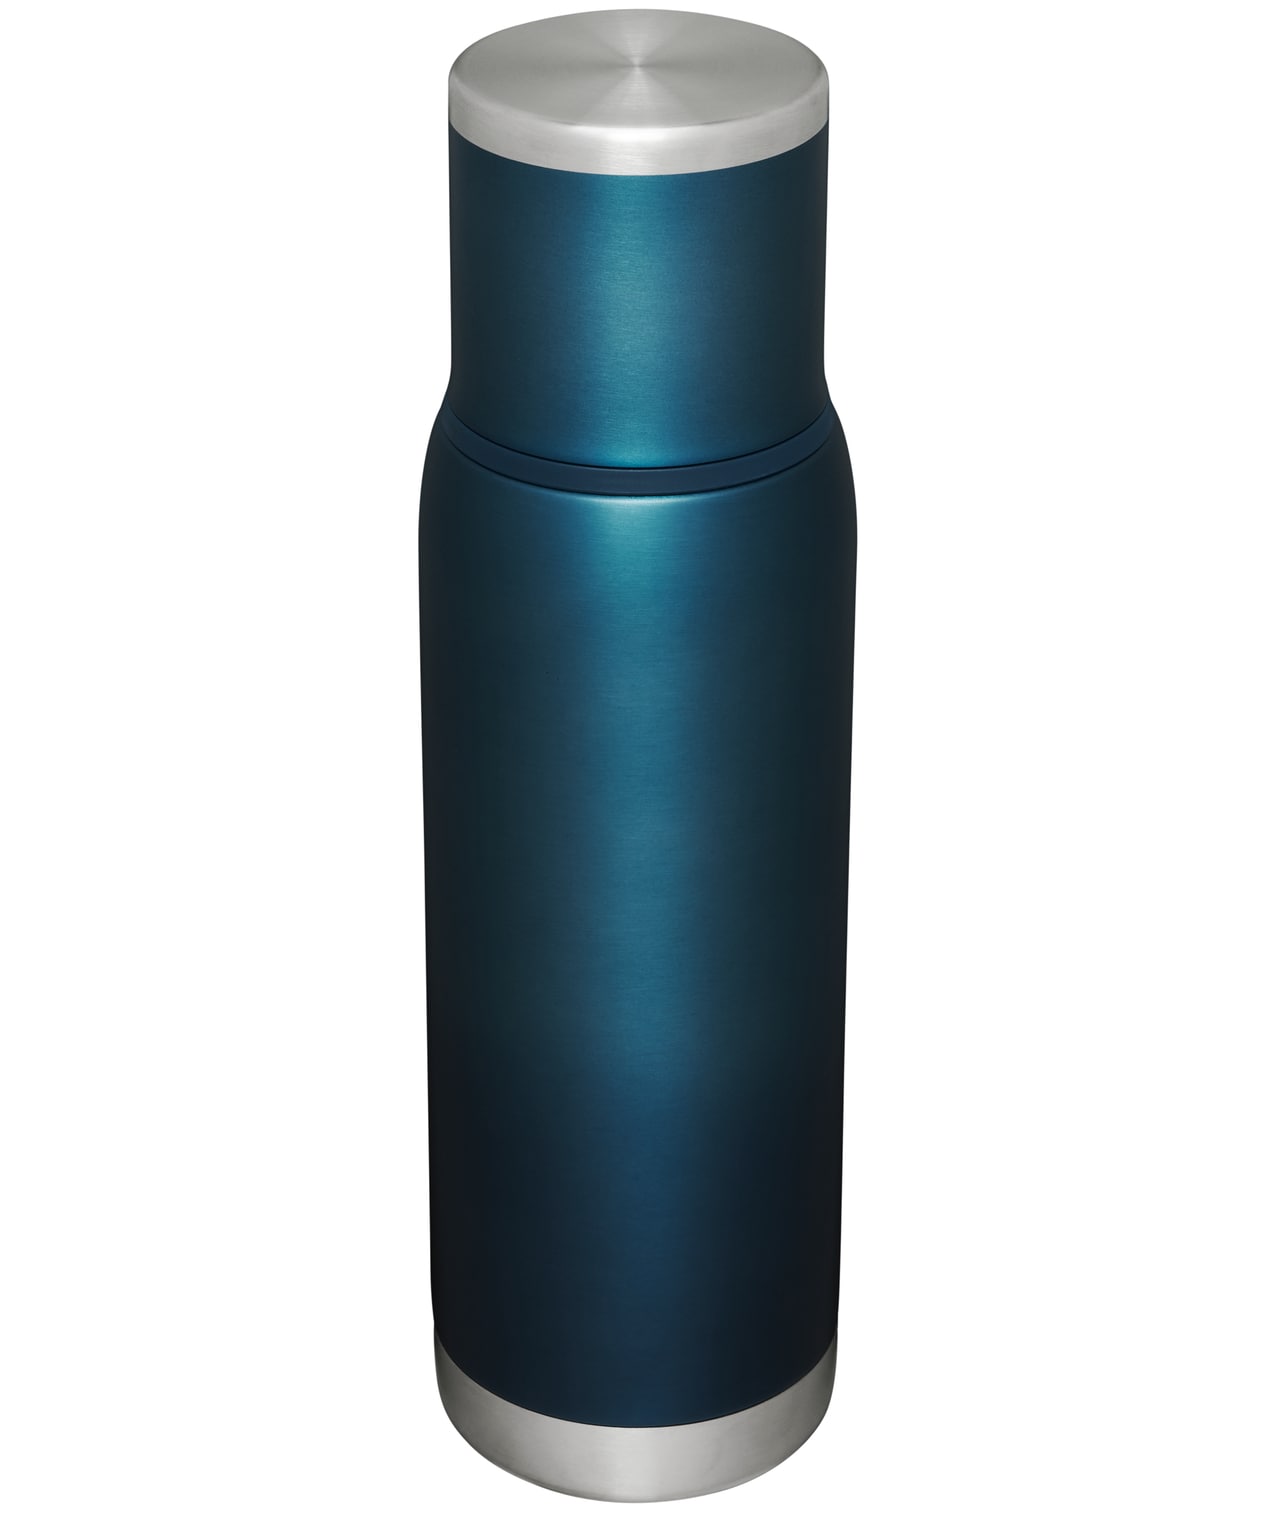 Stanley Classic Thermos Leak Proof Insulated Vacuum Bottle 1.1 qt -  Nightfall 